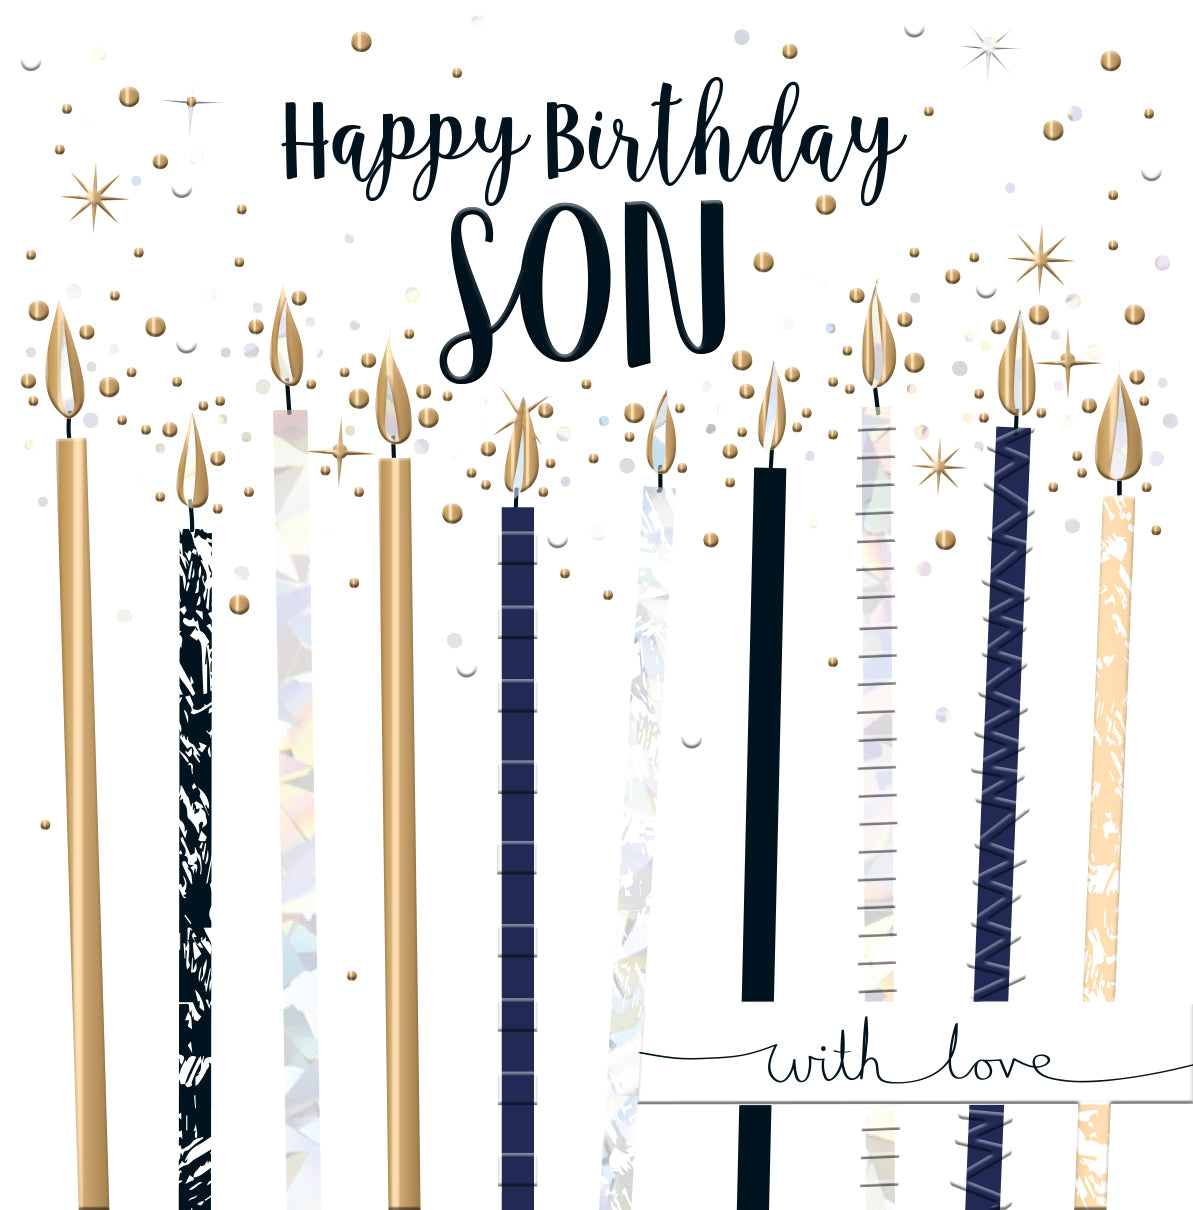 Son Birthday Card - Silver and Gold Candles